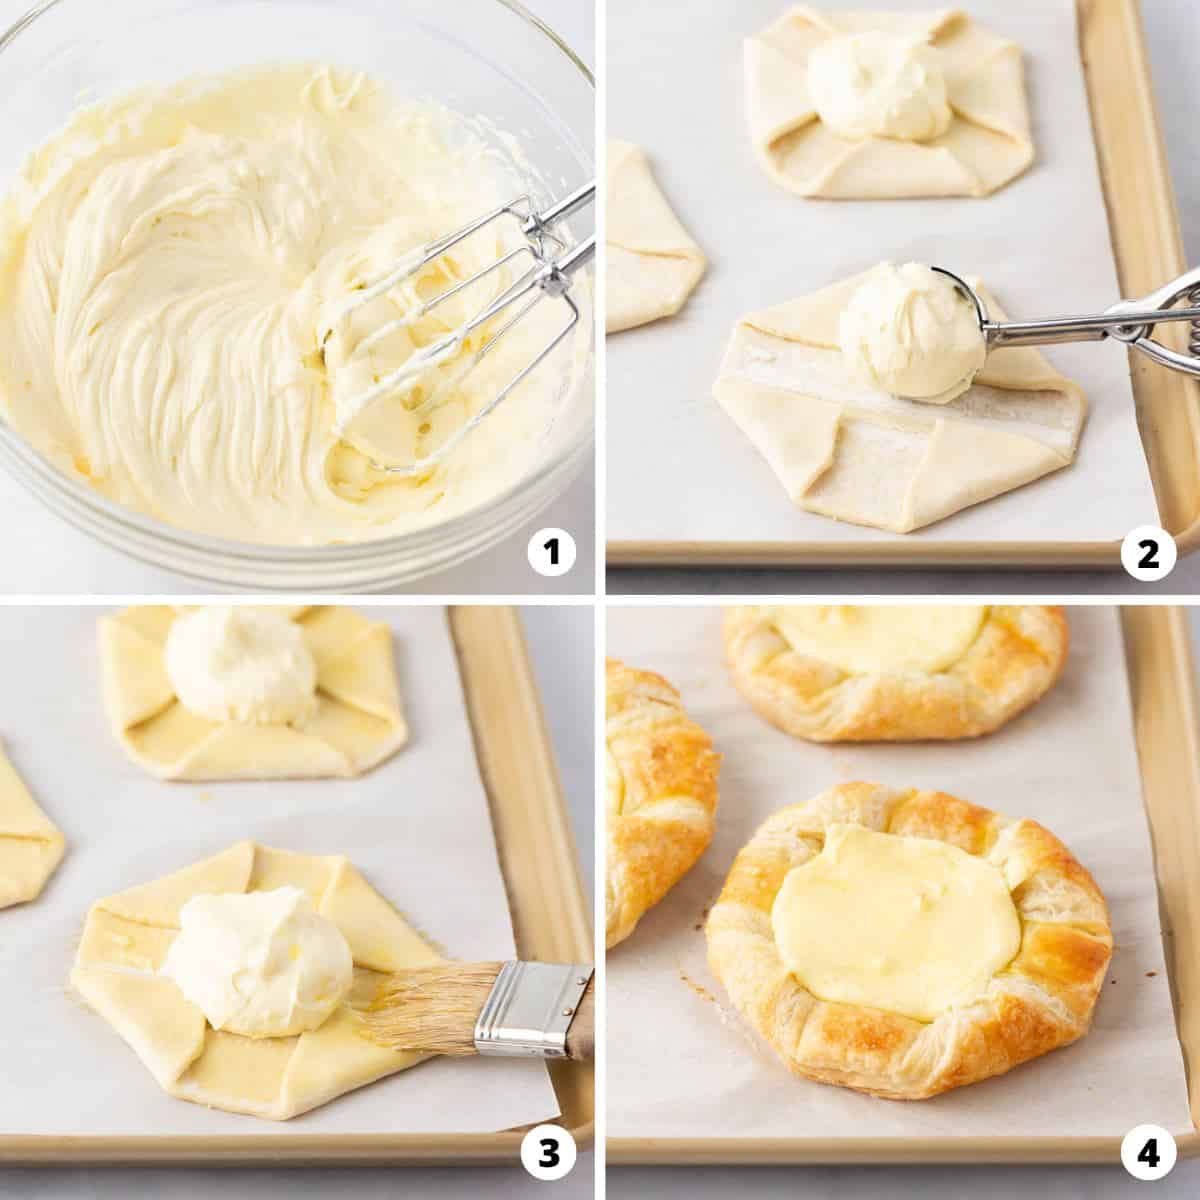 Showing how to make a cheese danish in a 4 step collage.